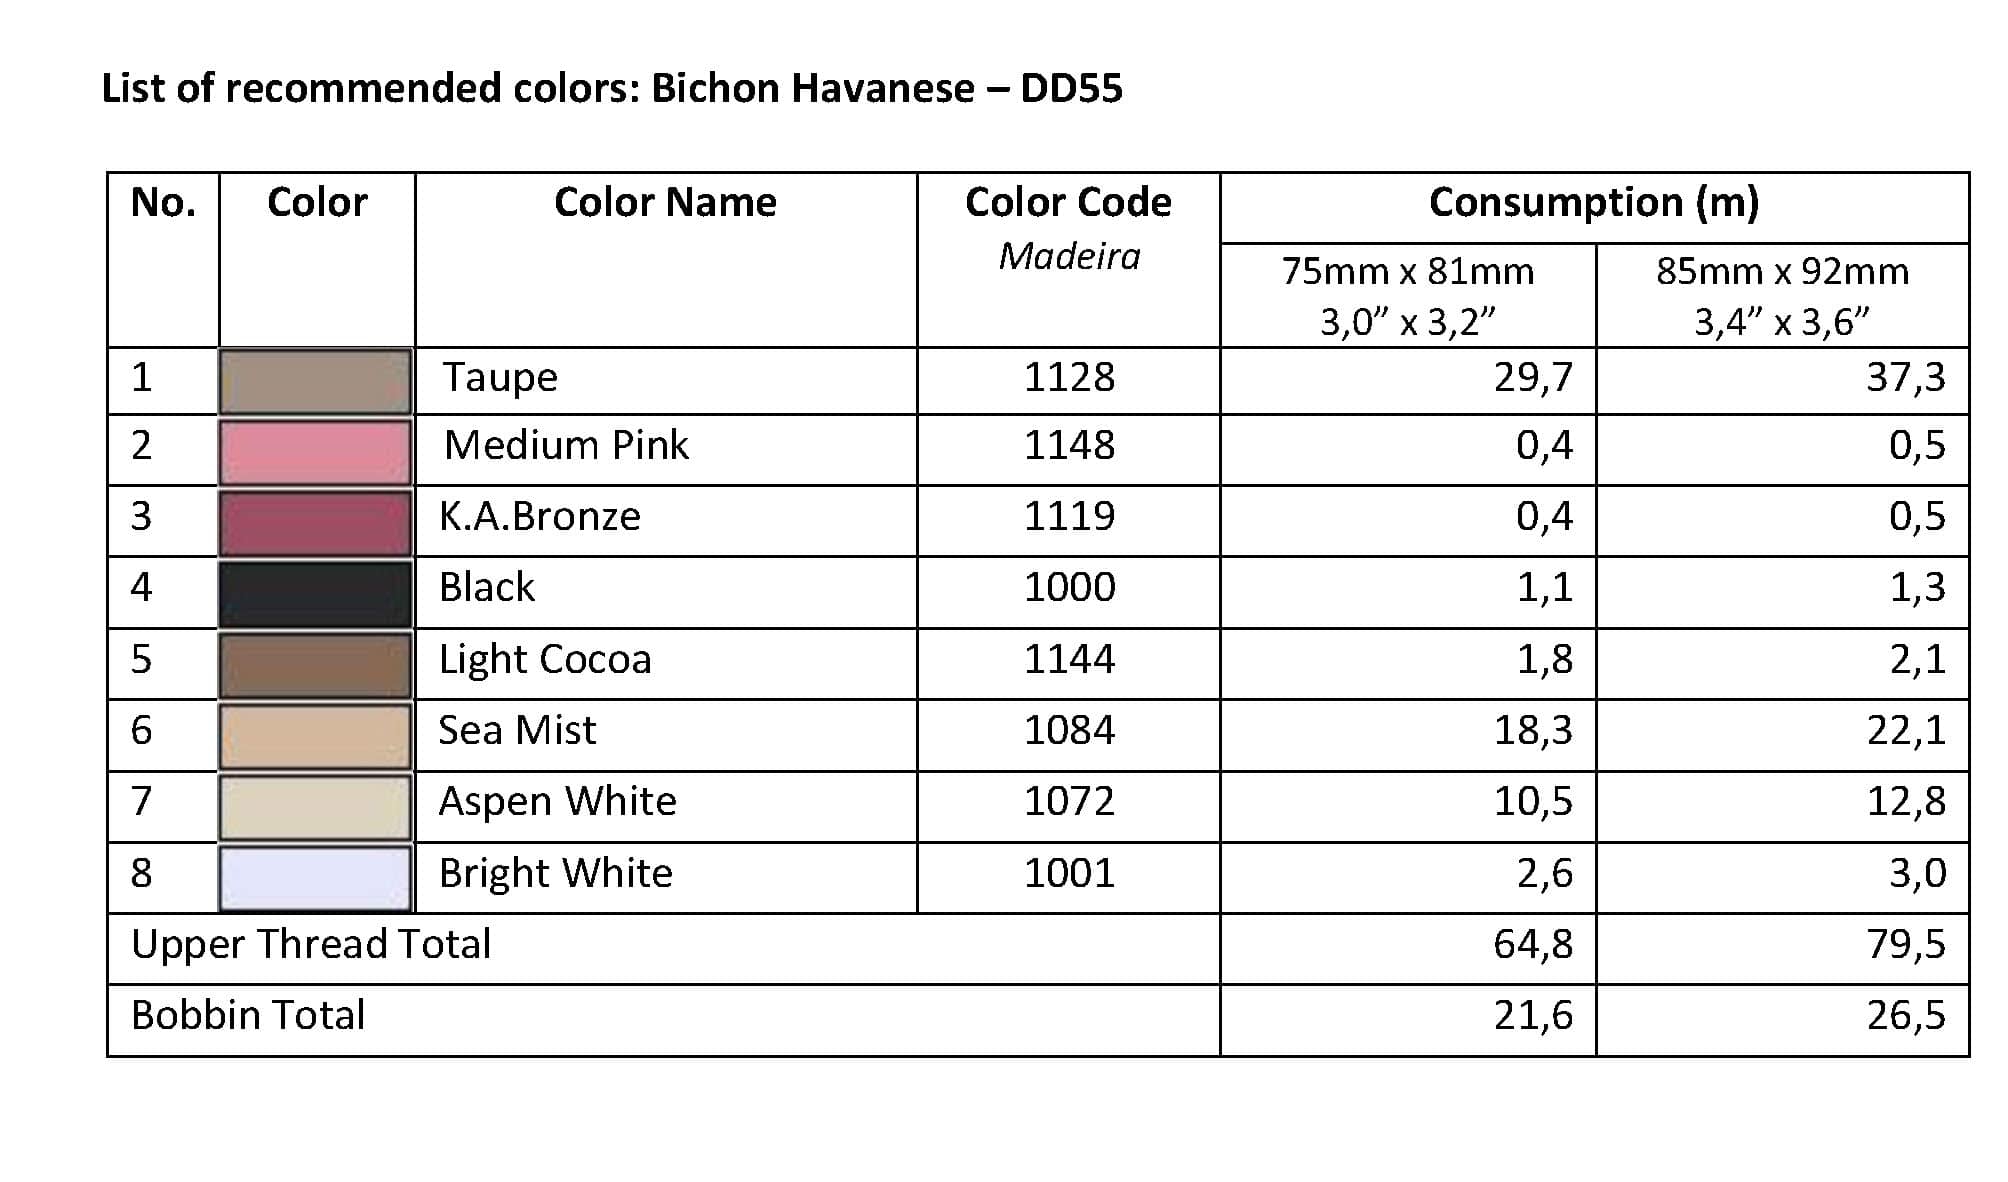 List of Recommended Colors - Bichon Havanese DD55